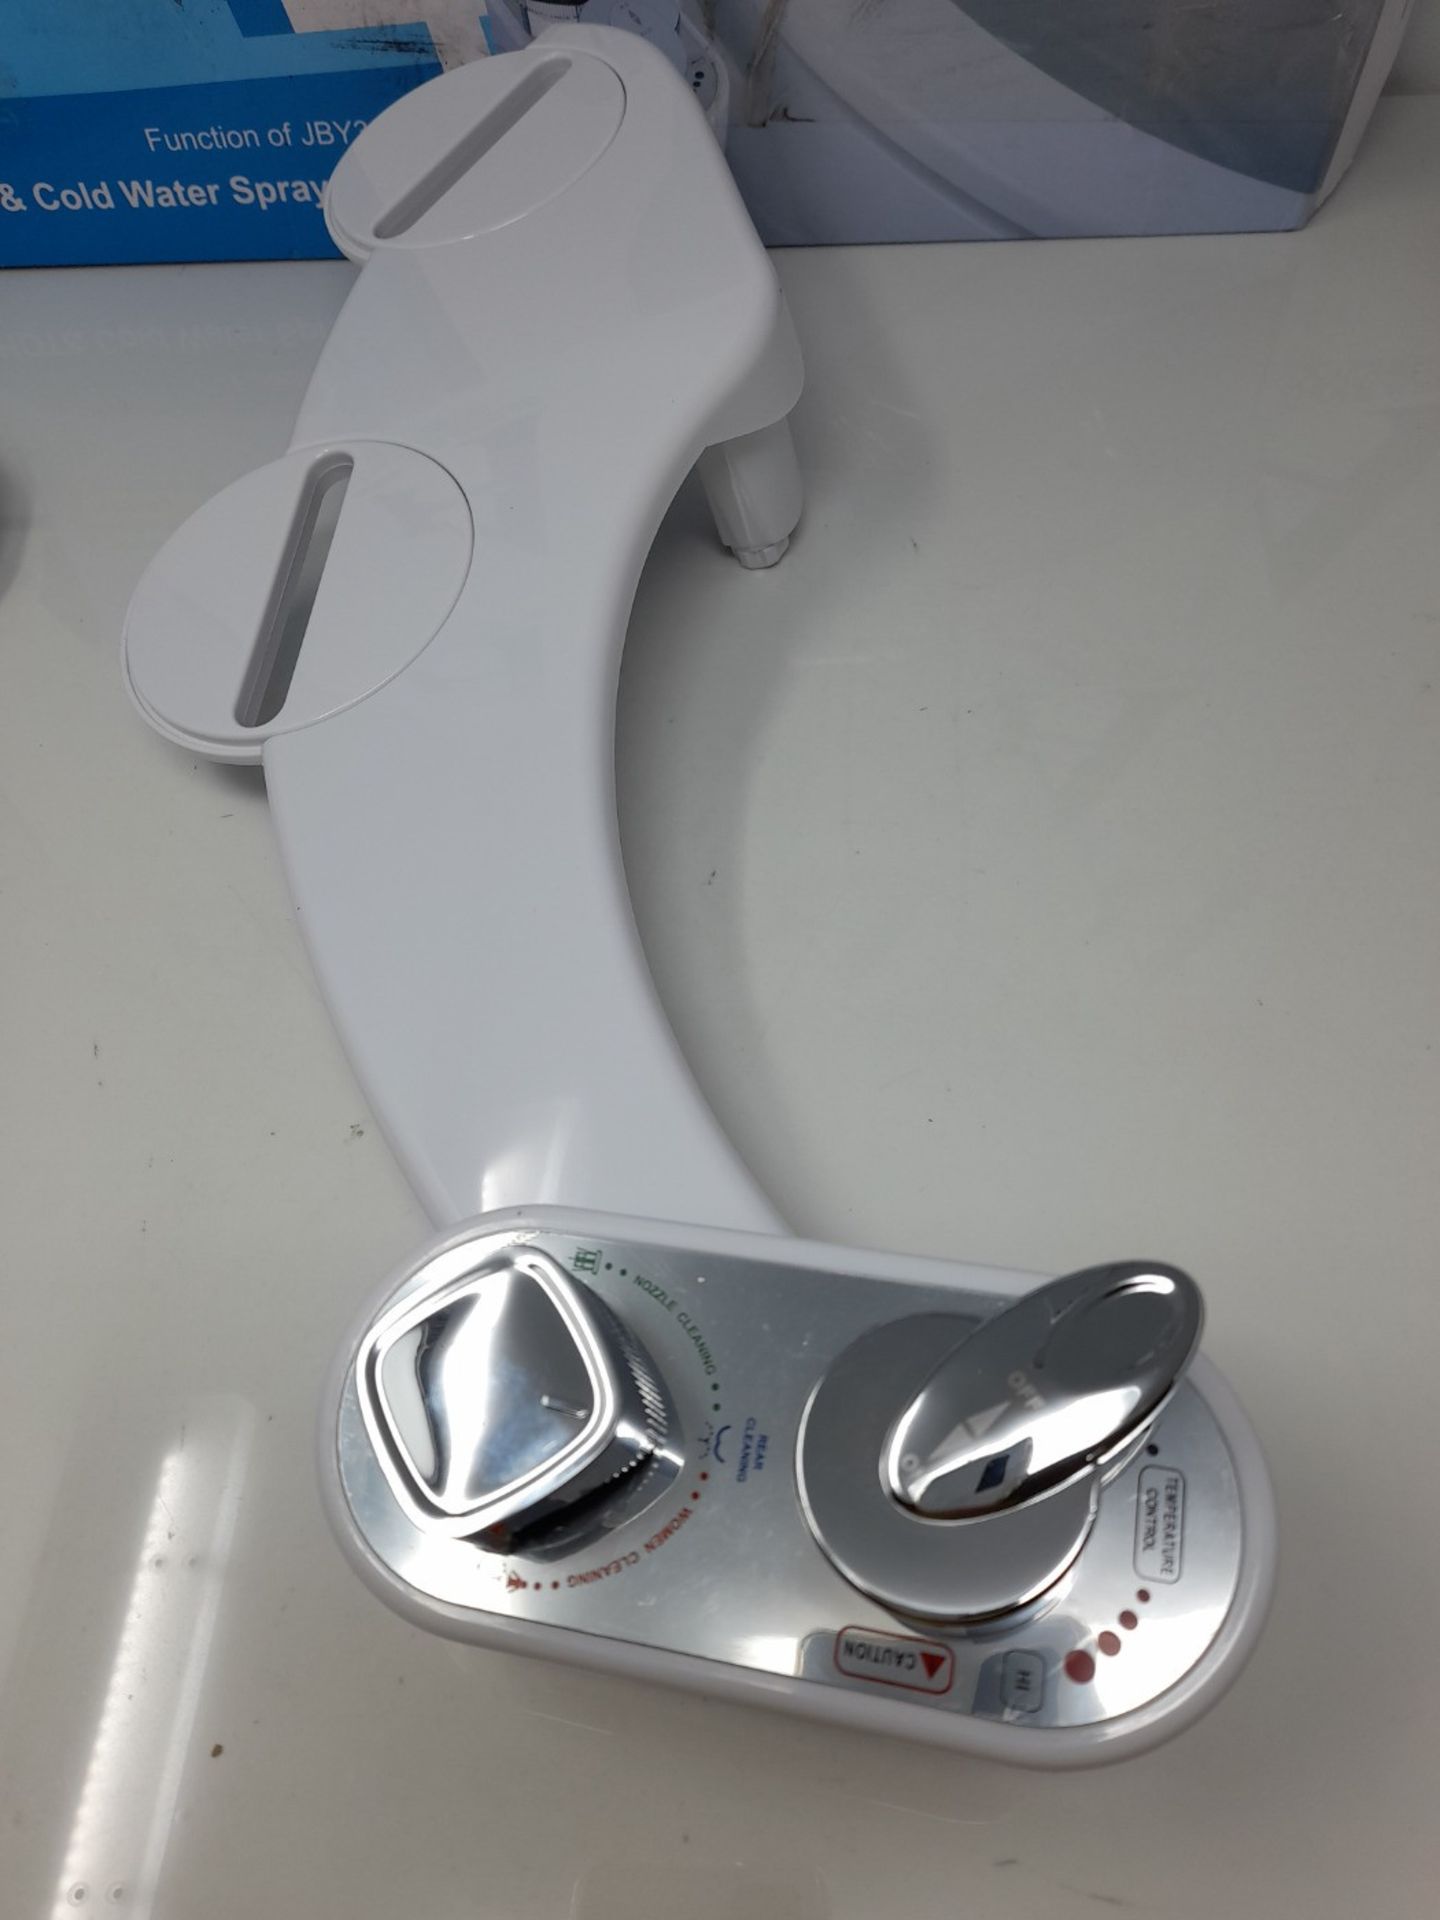 Bidet Toilet Seat Attachment, Hot&Cold Sprayer Bidet Non-Electric Mechanical, Self-Cle - Image 3 of 3